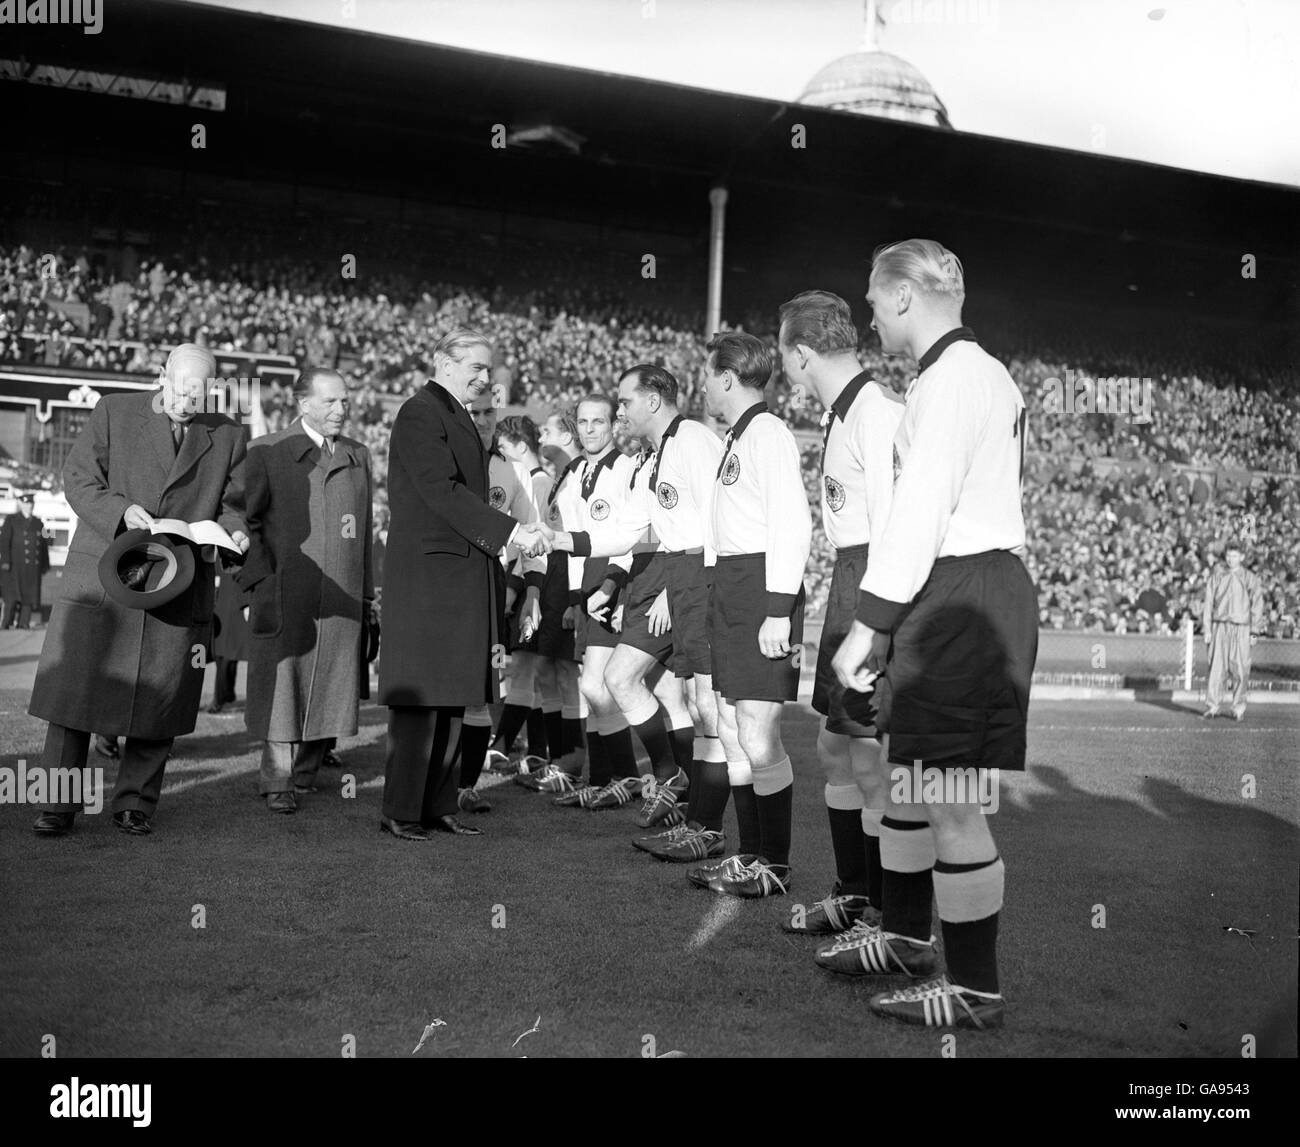 Sir Anthony Eden, British Foreign Minister shakes hands with members of the German team before the match at Wembley. Stock Photo